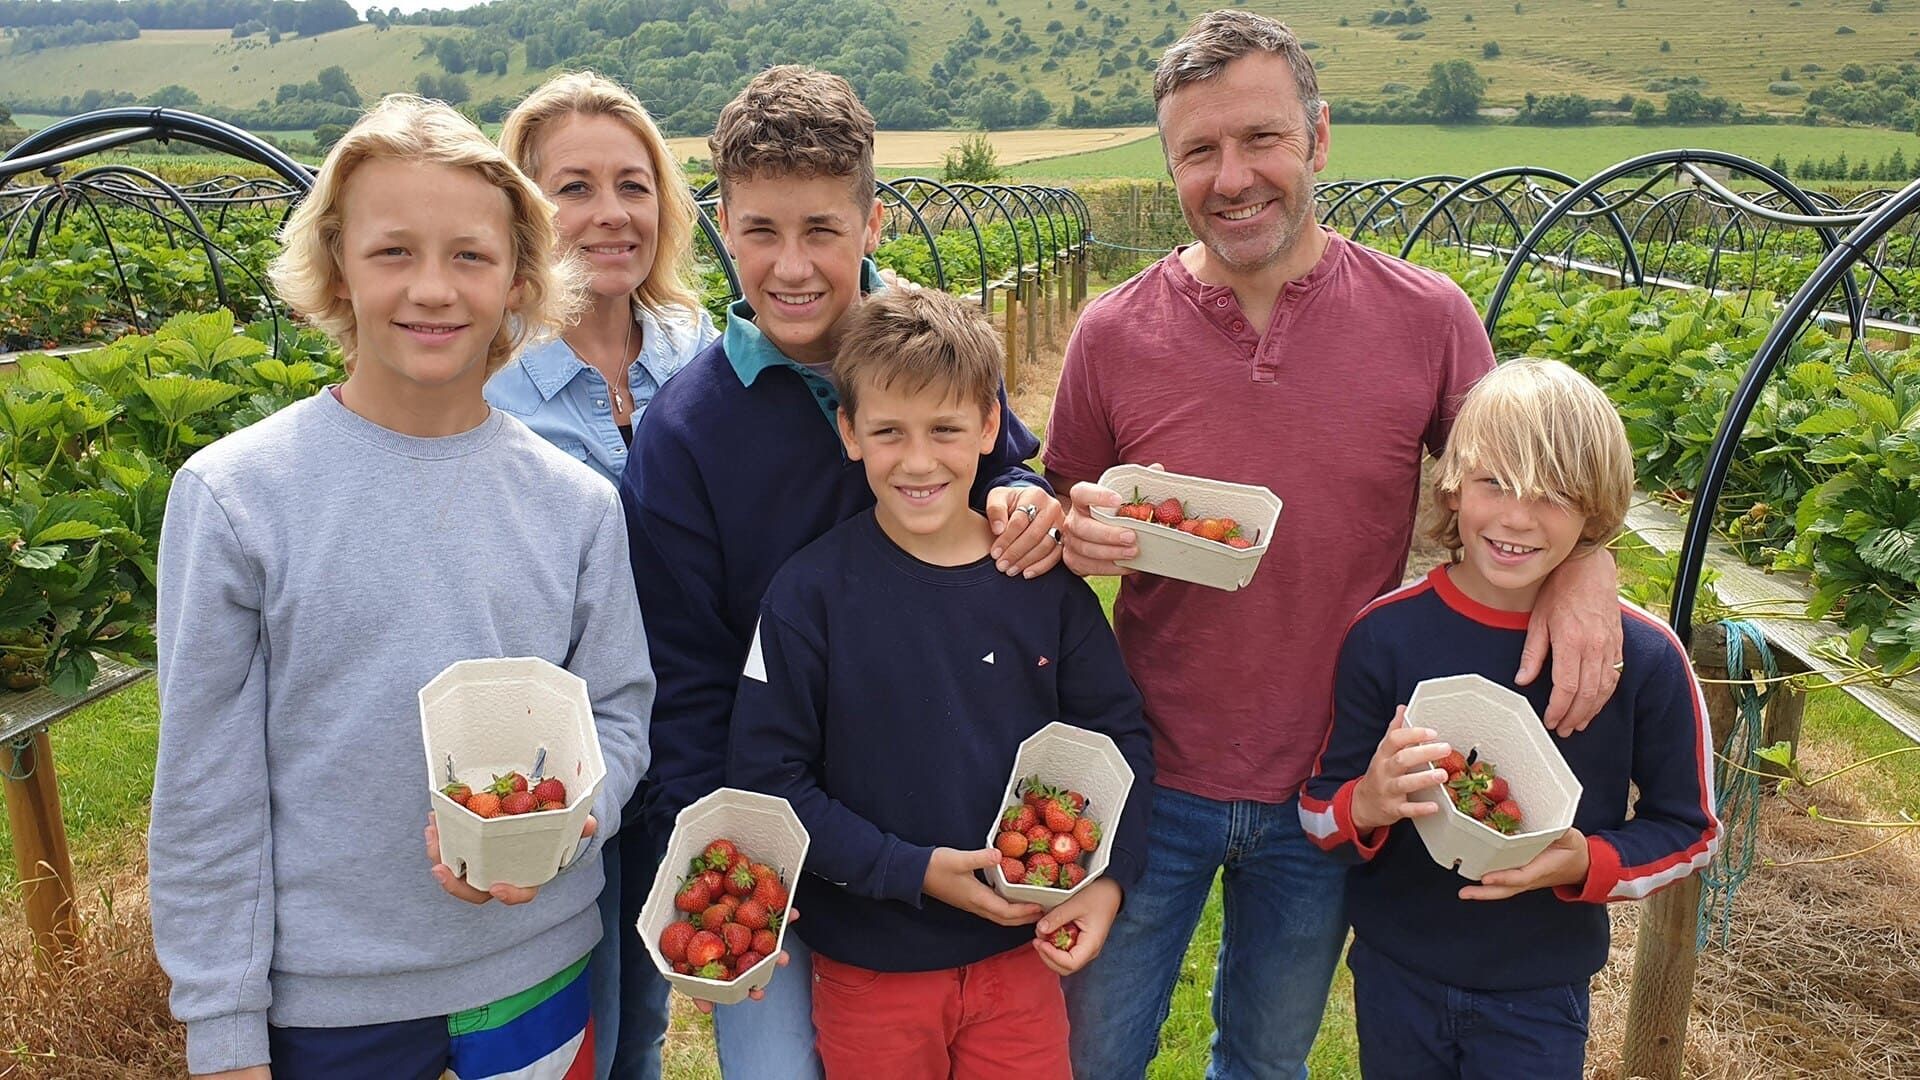 Sarah Beeny's New Life in the Country background